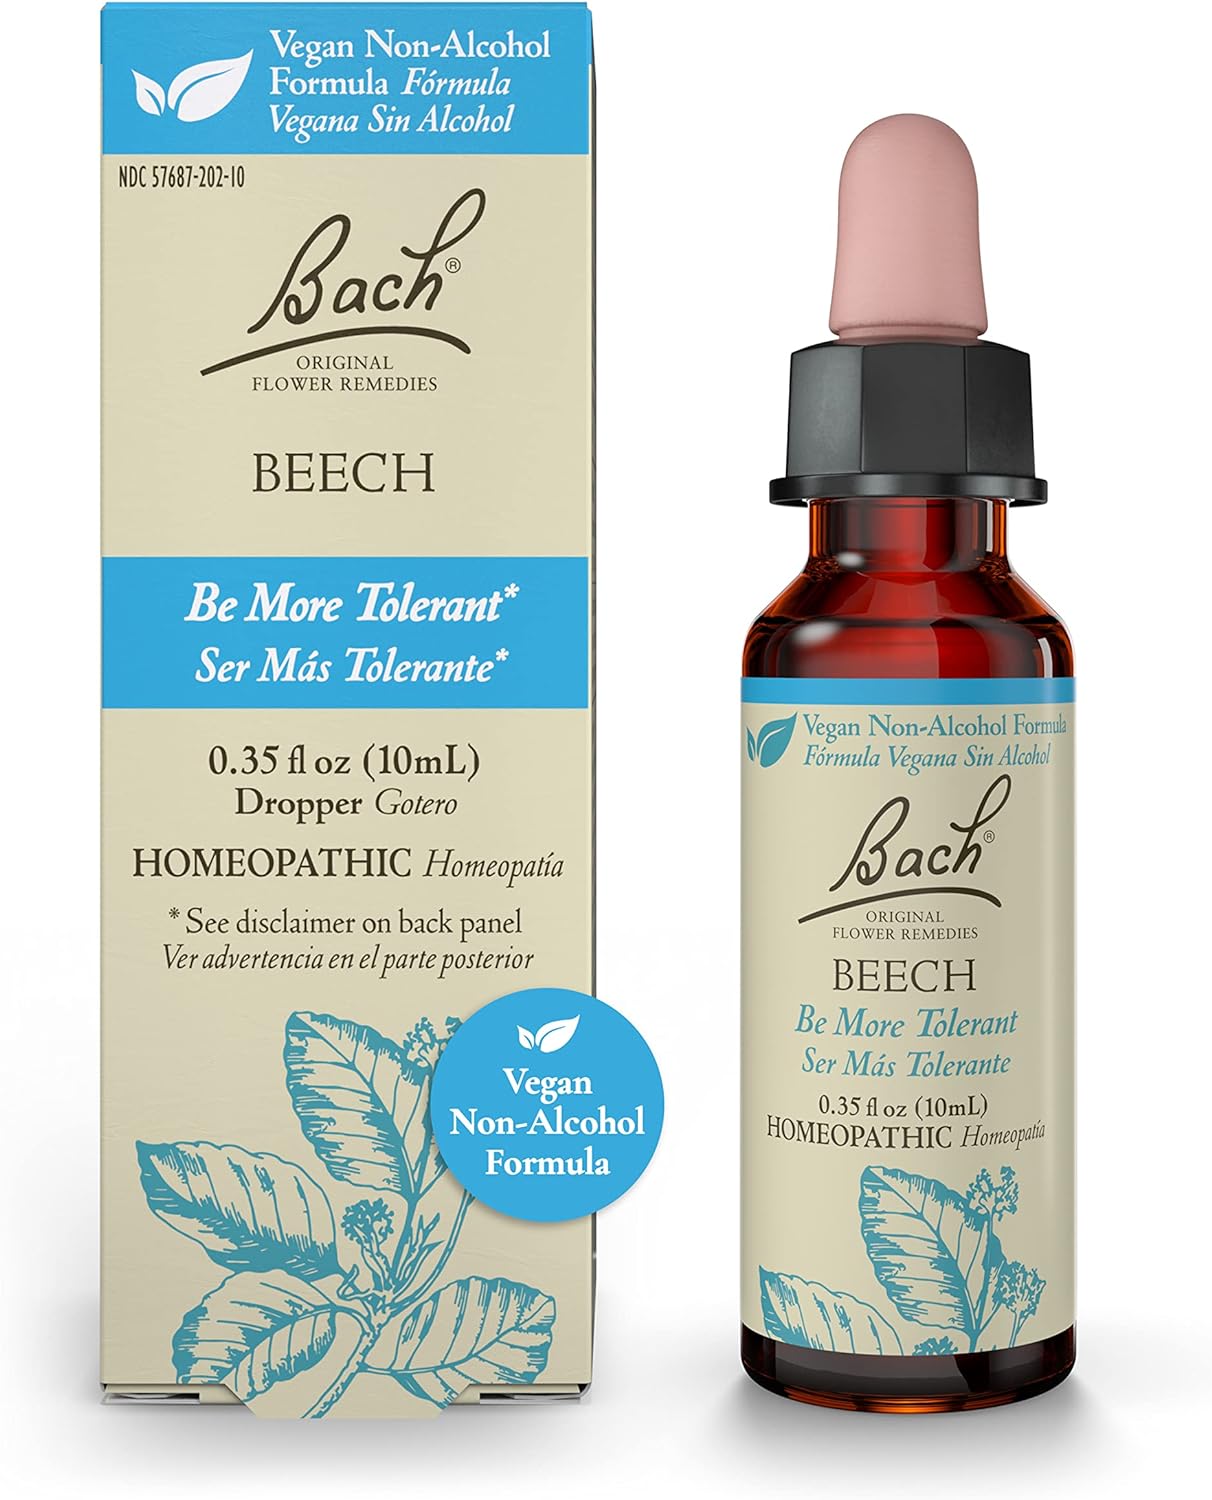 Bach Original Flower Remedies, Beech for Tolerance (Non-Alcohol Formula), Natural Homeopathic Flower Essence, Holistic Wellness and Stress Relief, Vegan, 10mL Dropper